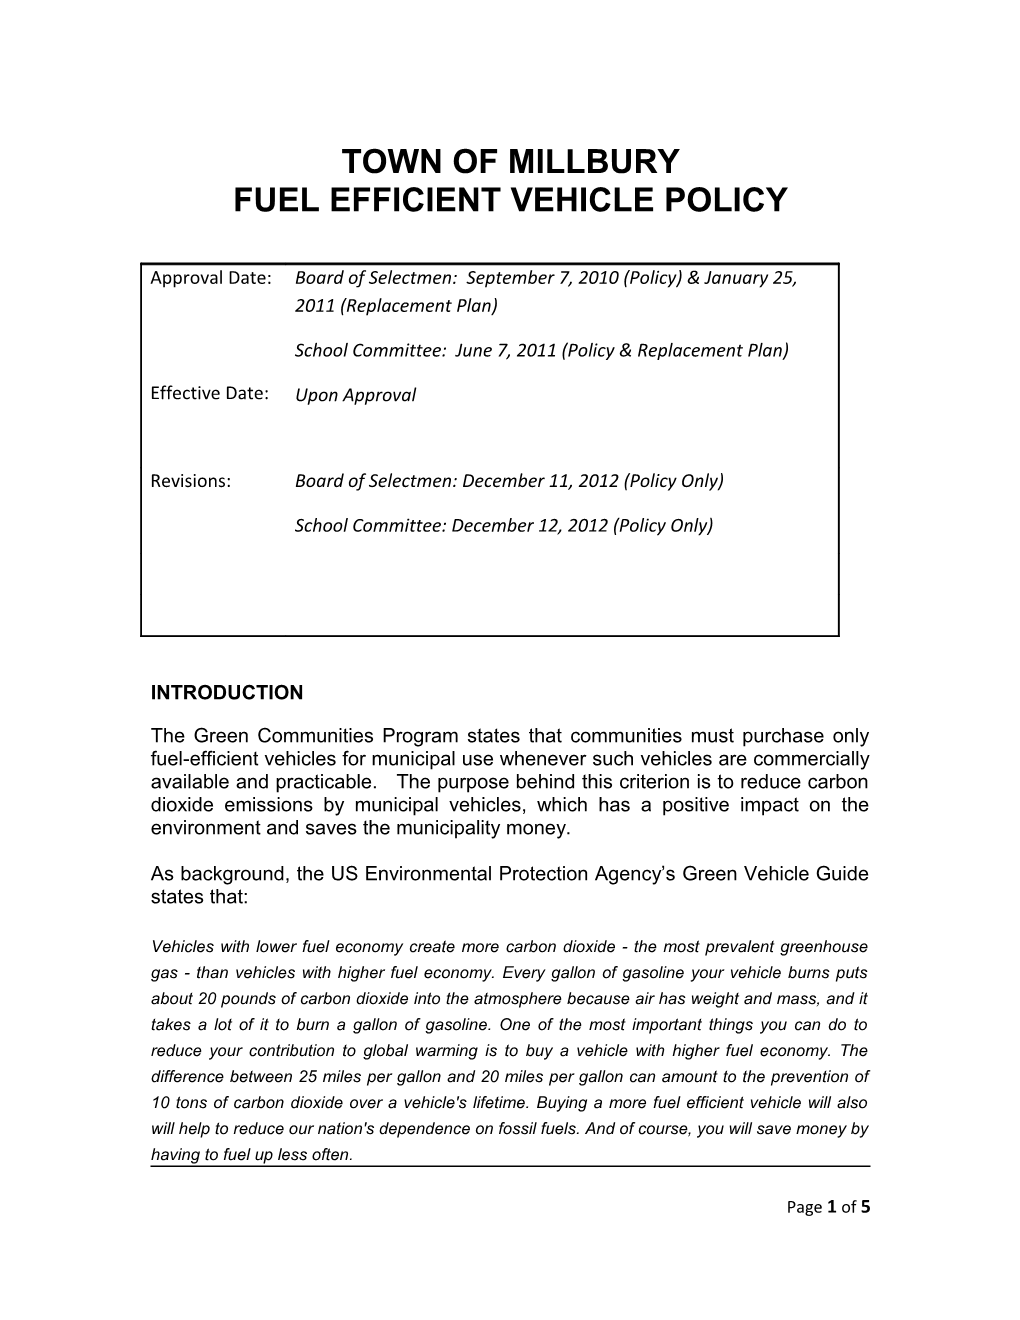 Fuel Efficient Vehicle Policy